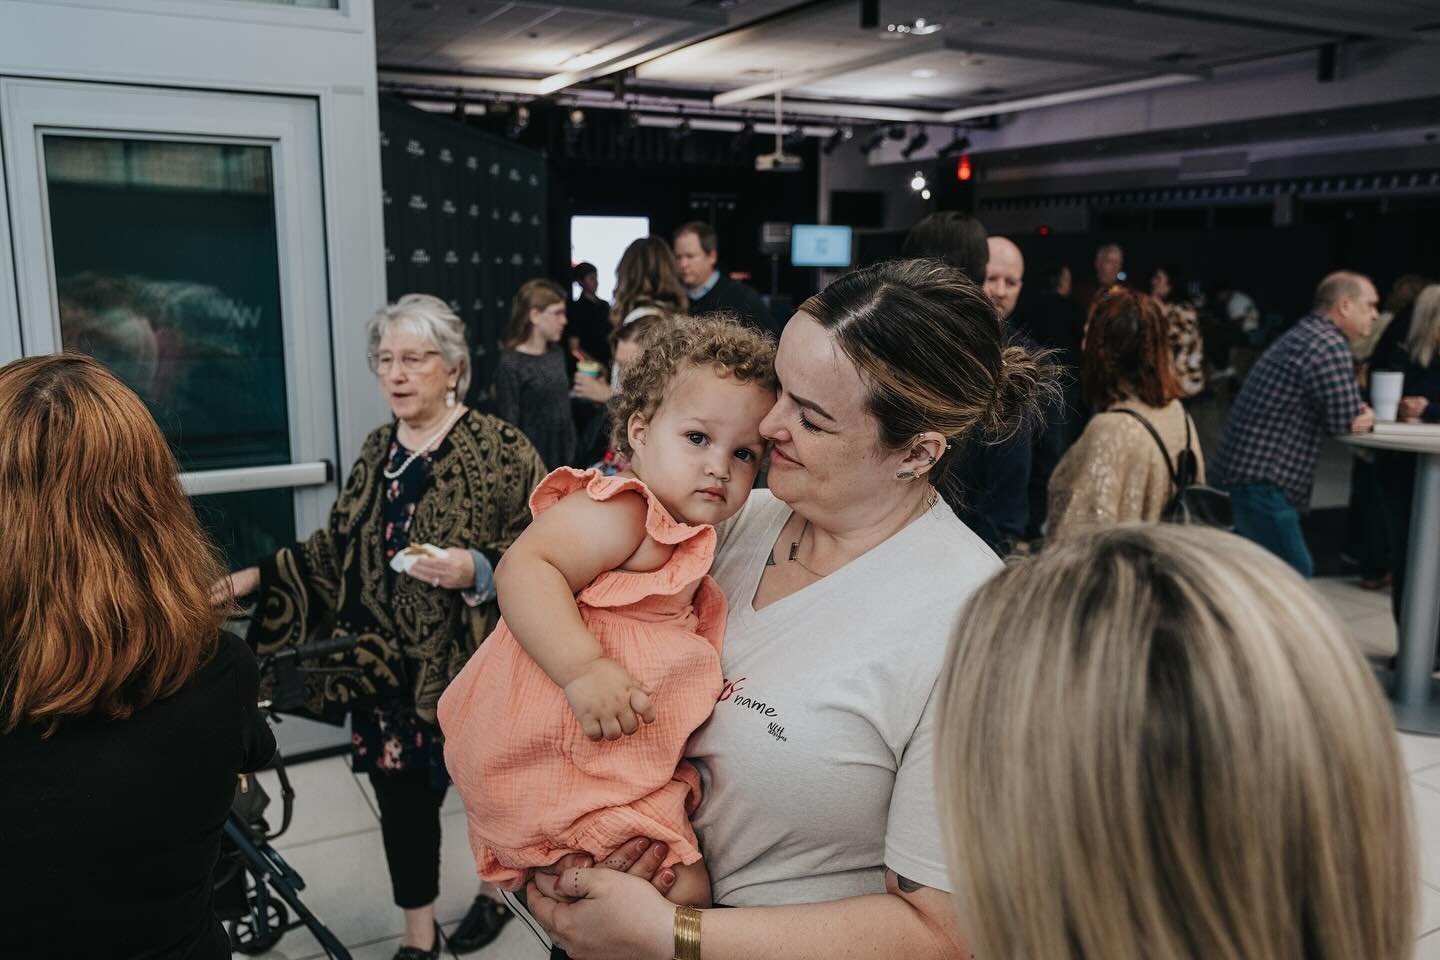 Mother&rsquo;s Day is nearly here and we can&rsquo;t wait to celebrate all of the special ladies in our lives! Join us on  Sunday as we worship Jesus together and take time to honor all of the women in the room. We are so thankful for them! 10AM @ 14